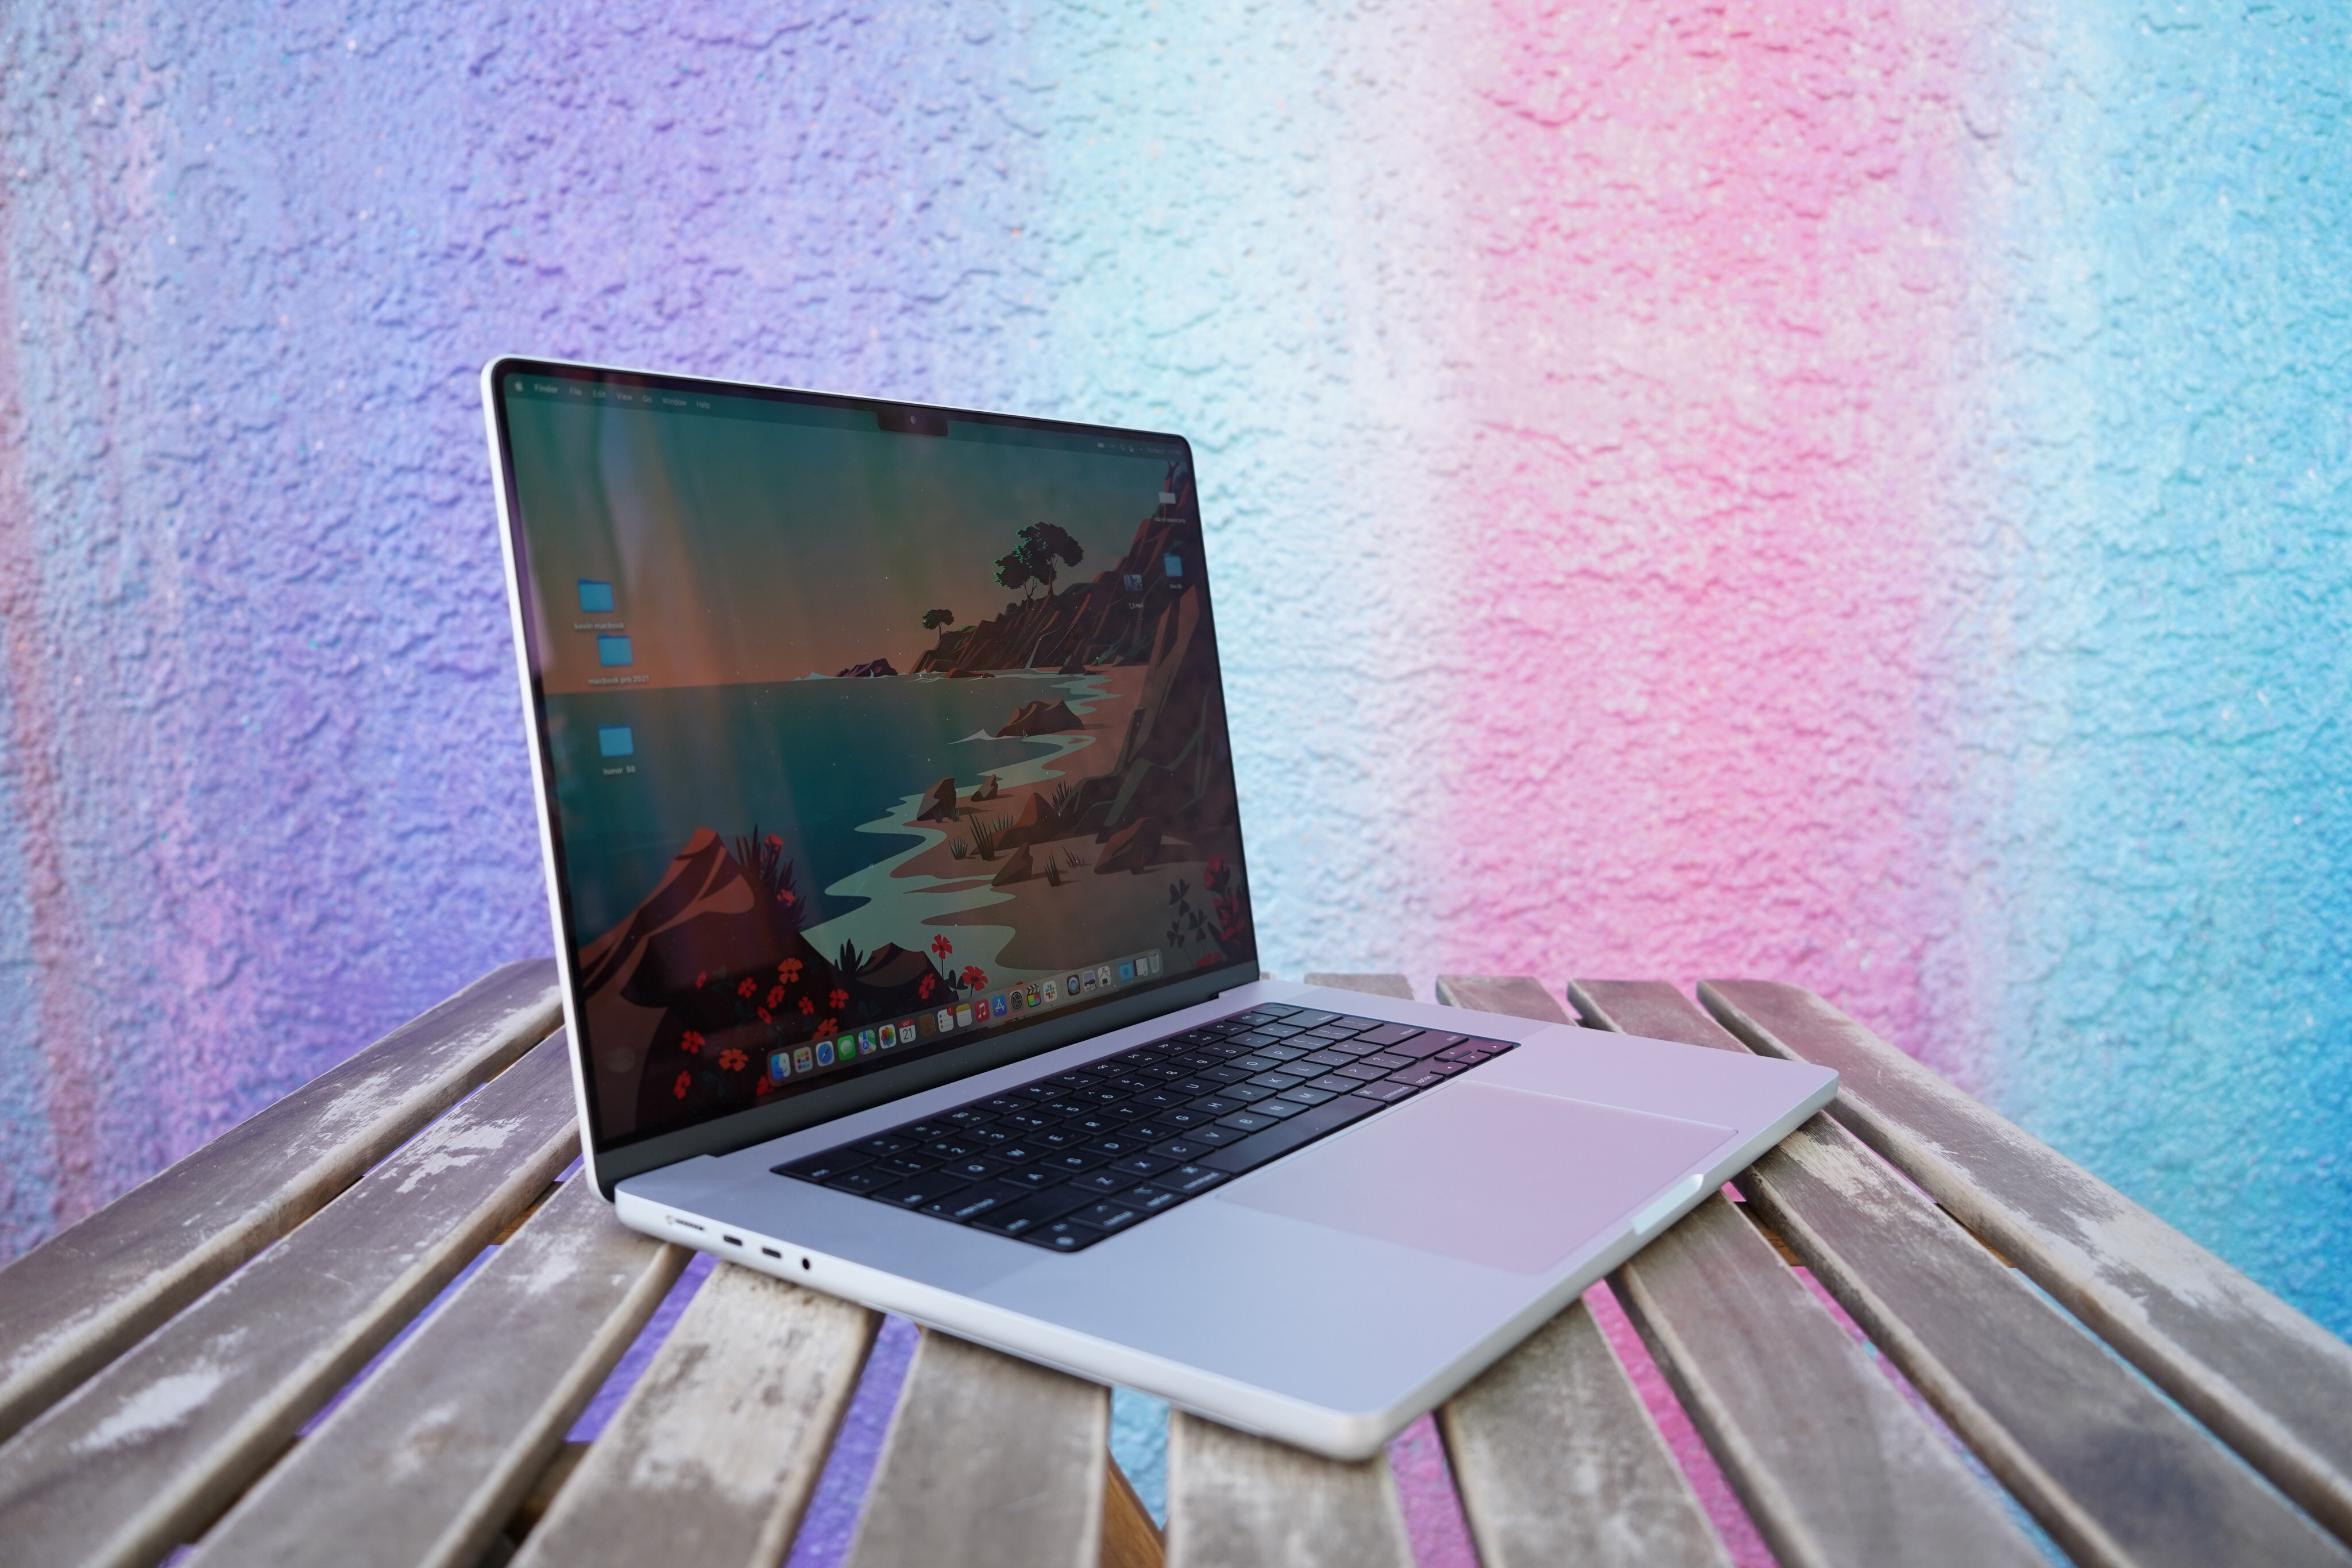 Apple’s new 16-inch MacBook Pro, powered by the M1 Max chip. Photo: Ben Sin